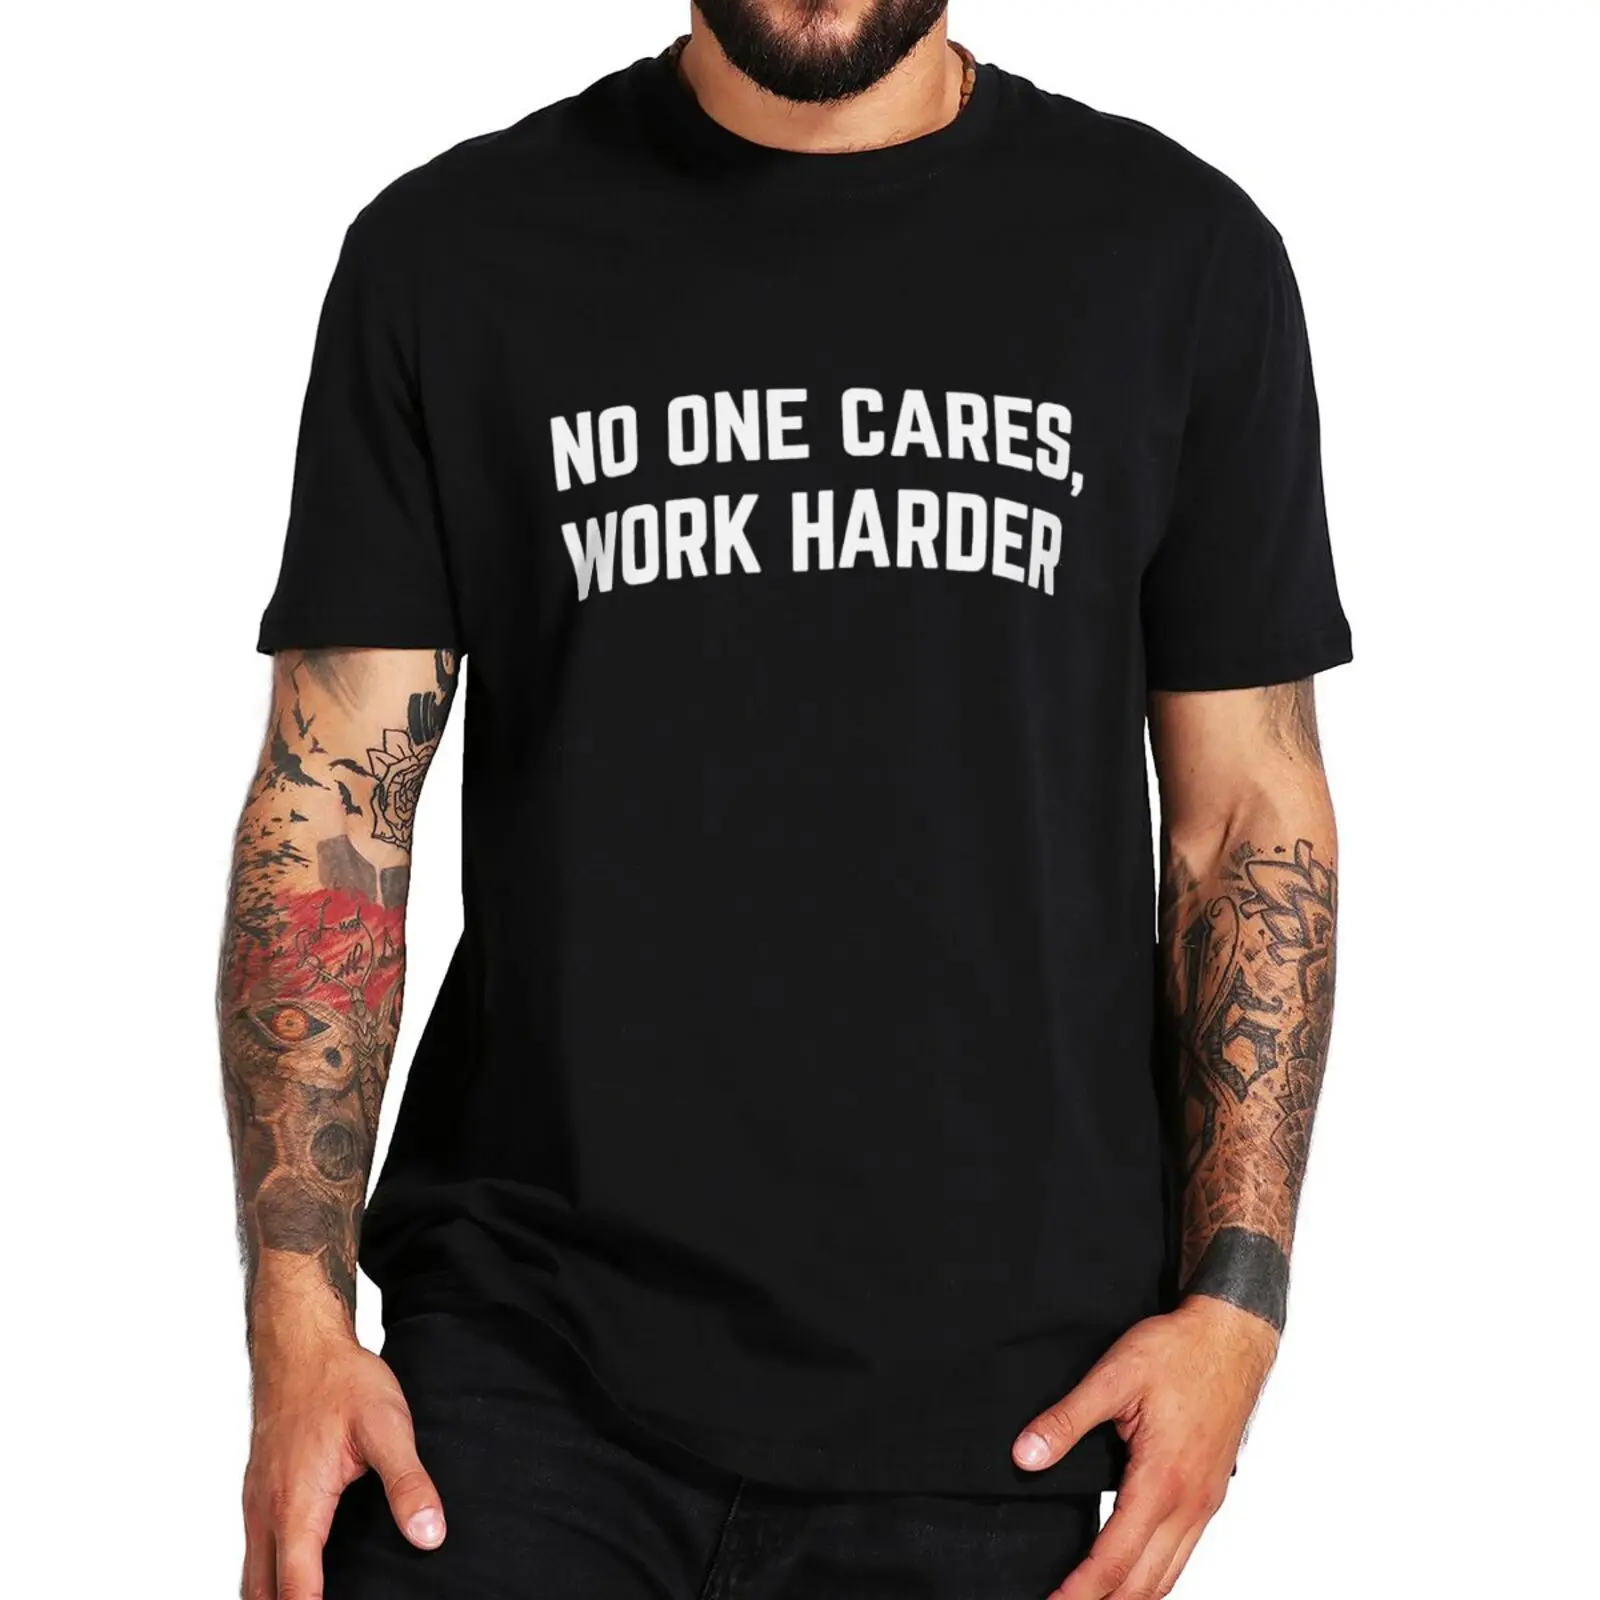 

No One Cares Work Harder T-shirt Funny Motivational Phrase Weight Lifting Lovers Gift Short Sleeve Summer Cotton T Shirt